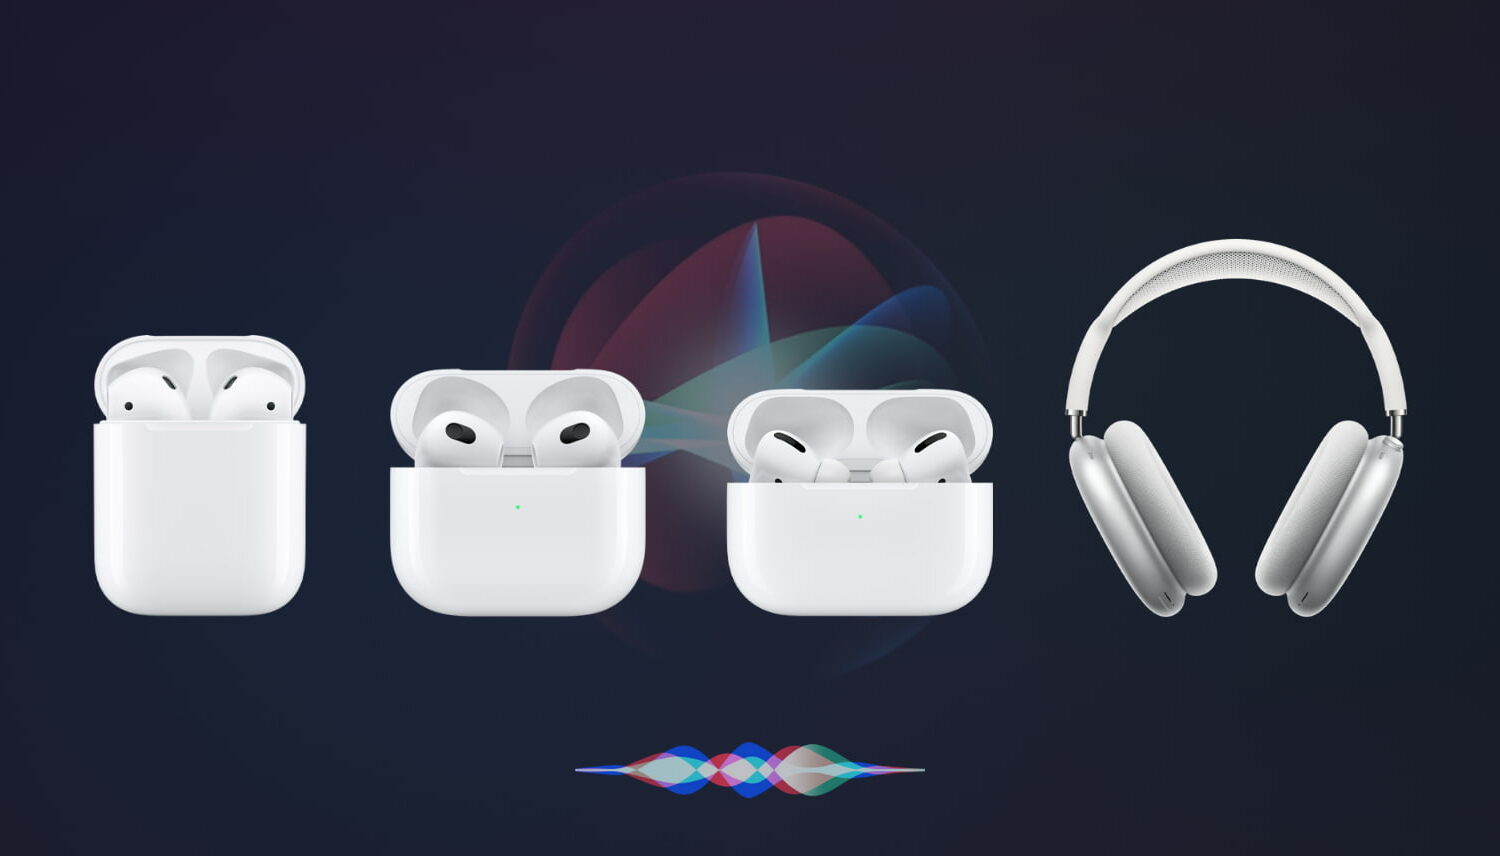 AirPods 1st, 2nd, 3rd generation, AirPods Pro, and AirPods Max with Siri icon in the background